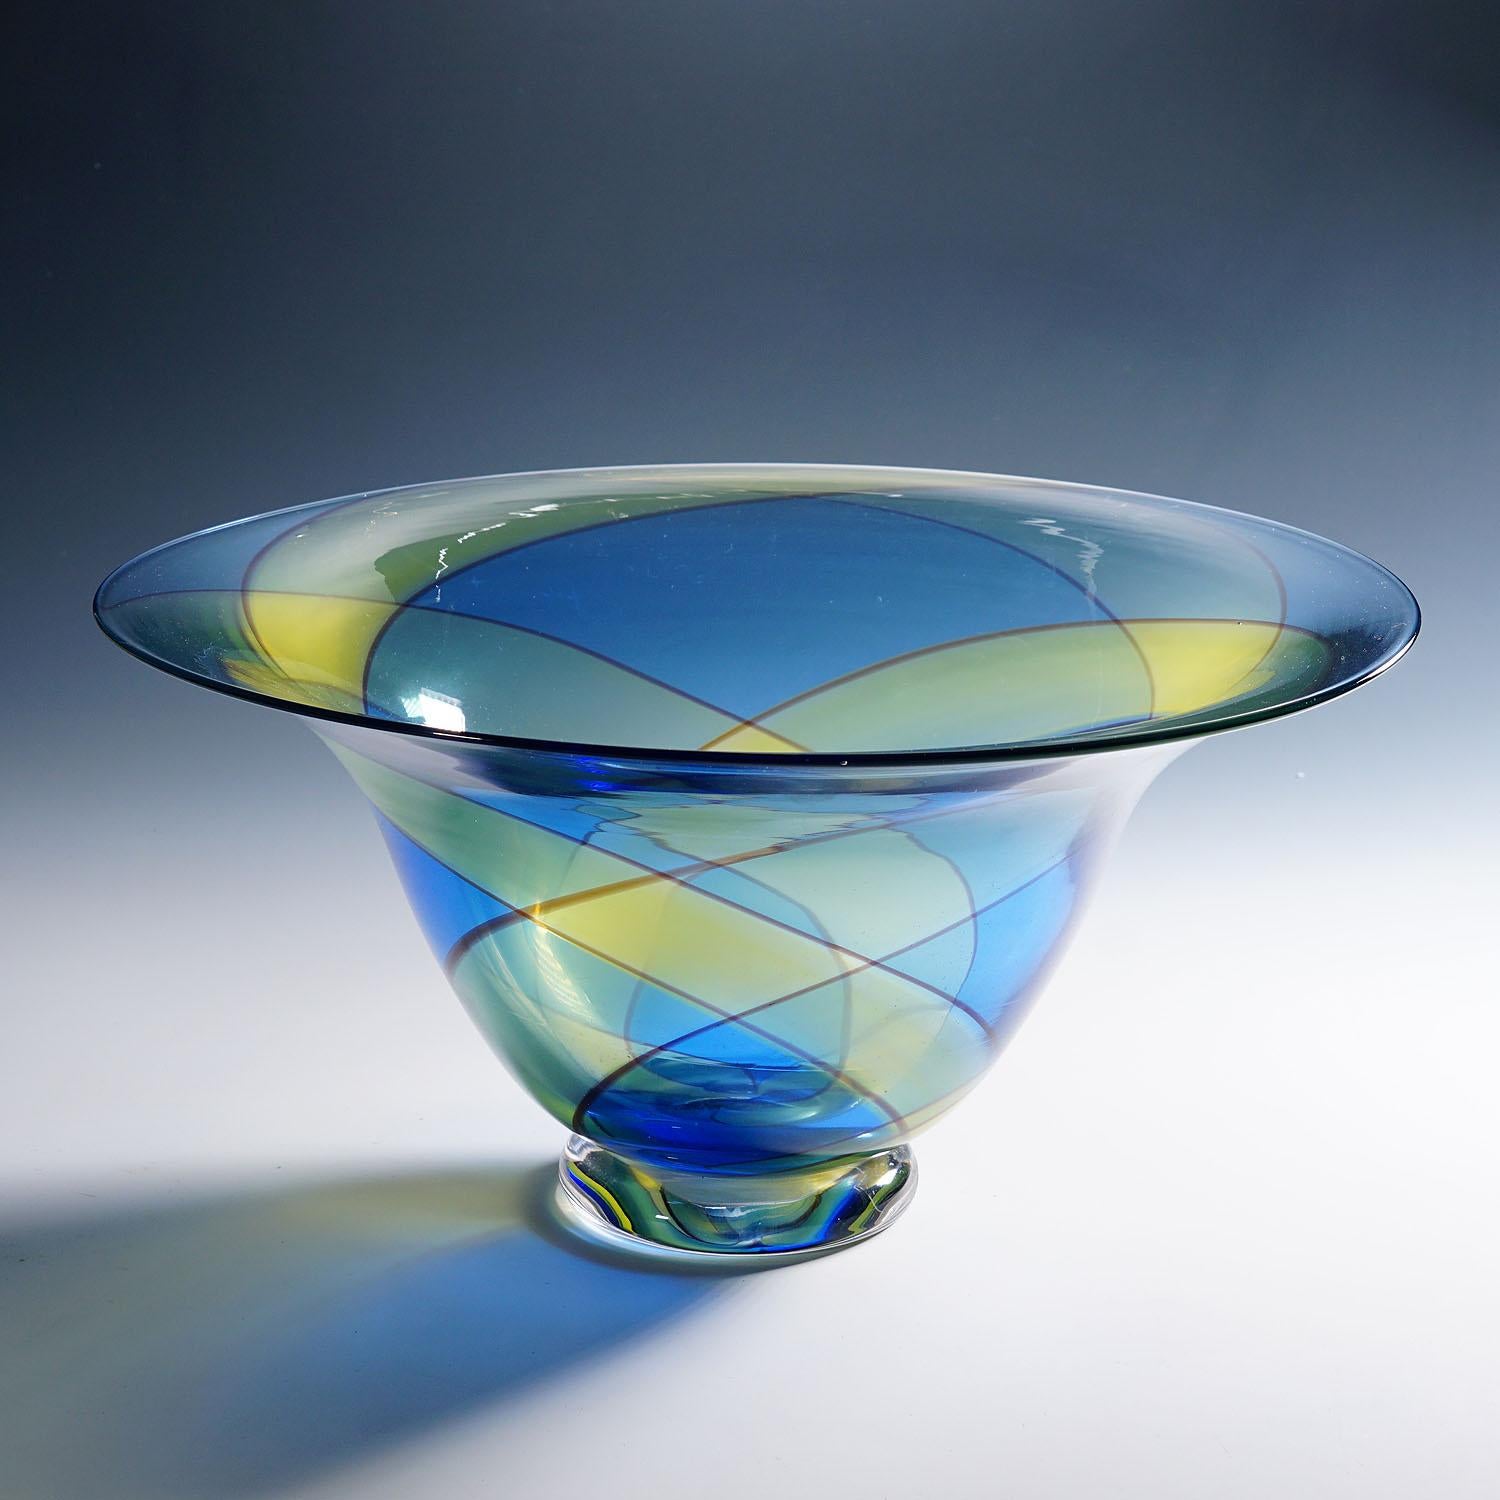 Large Carnevale Art Glass Bowl by Vetreria Archimede Seguso ca. 1980s In Good Condition For Sale In Berghuelen, DE